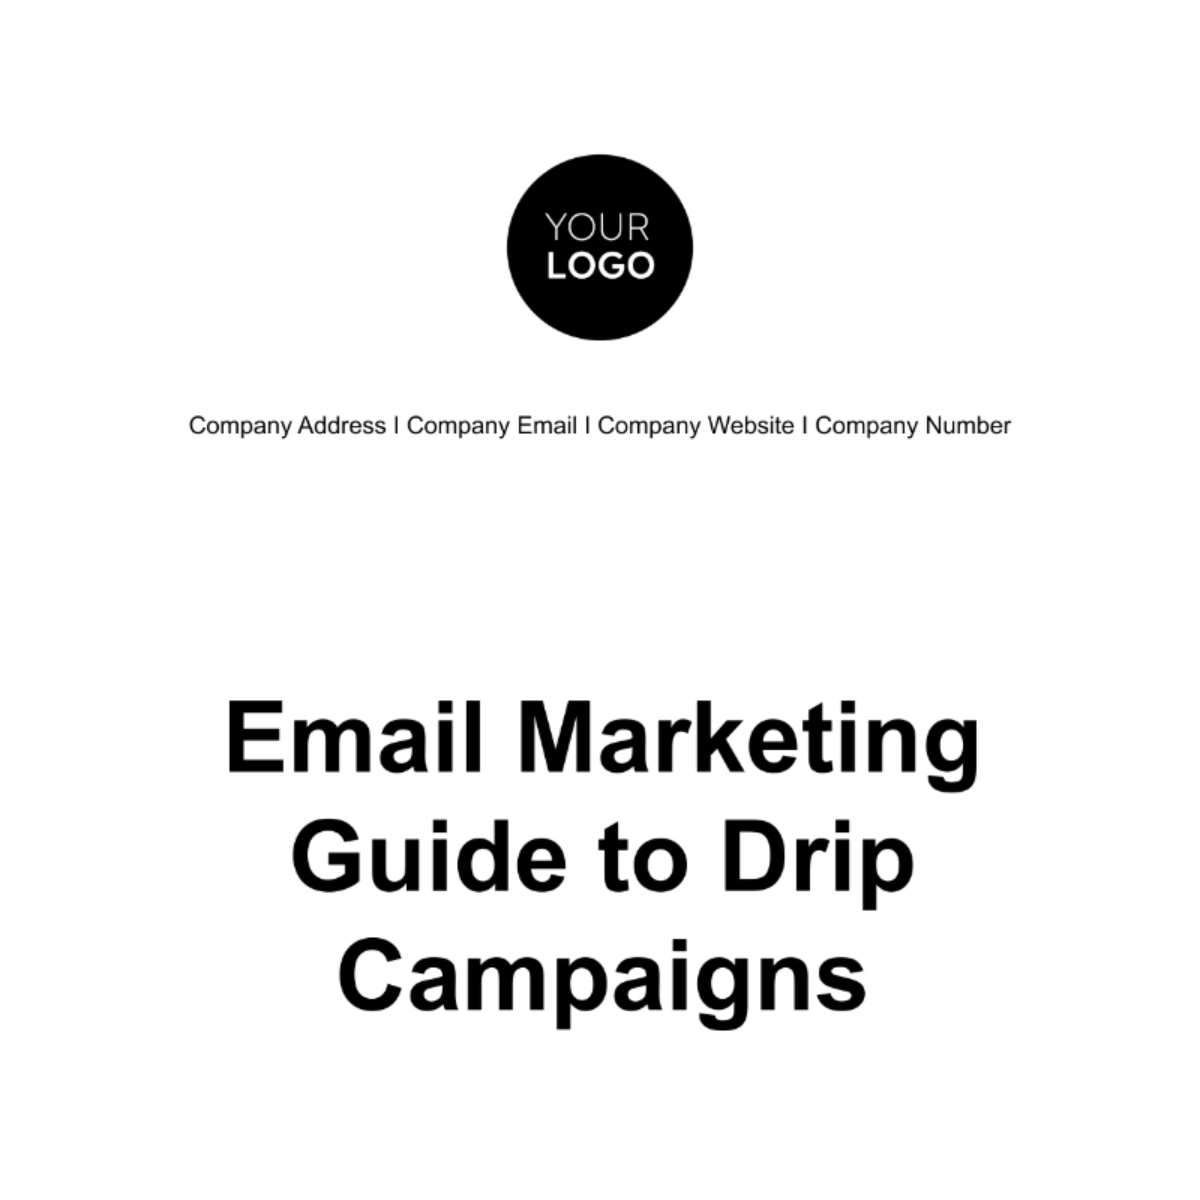 Email Marketing Guide to Drip Campaigns Template